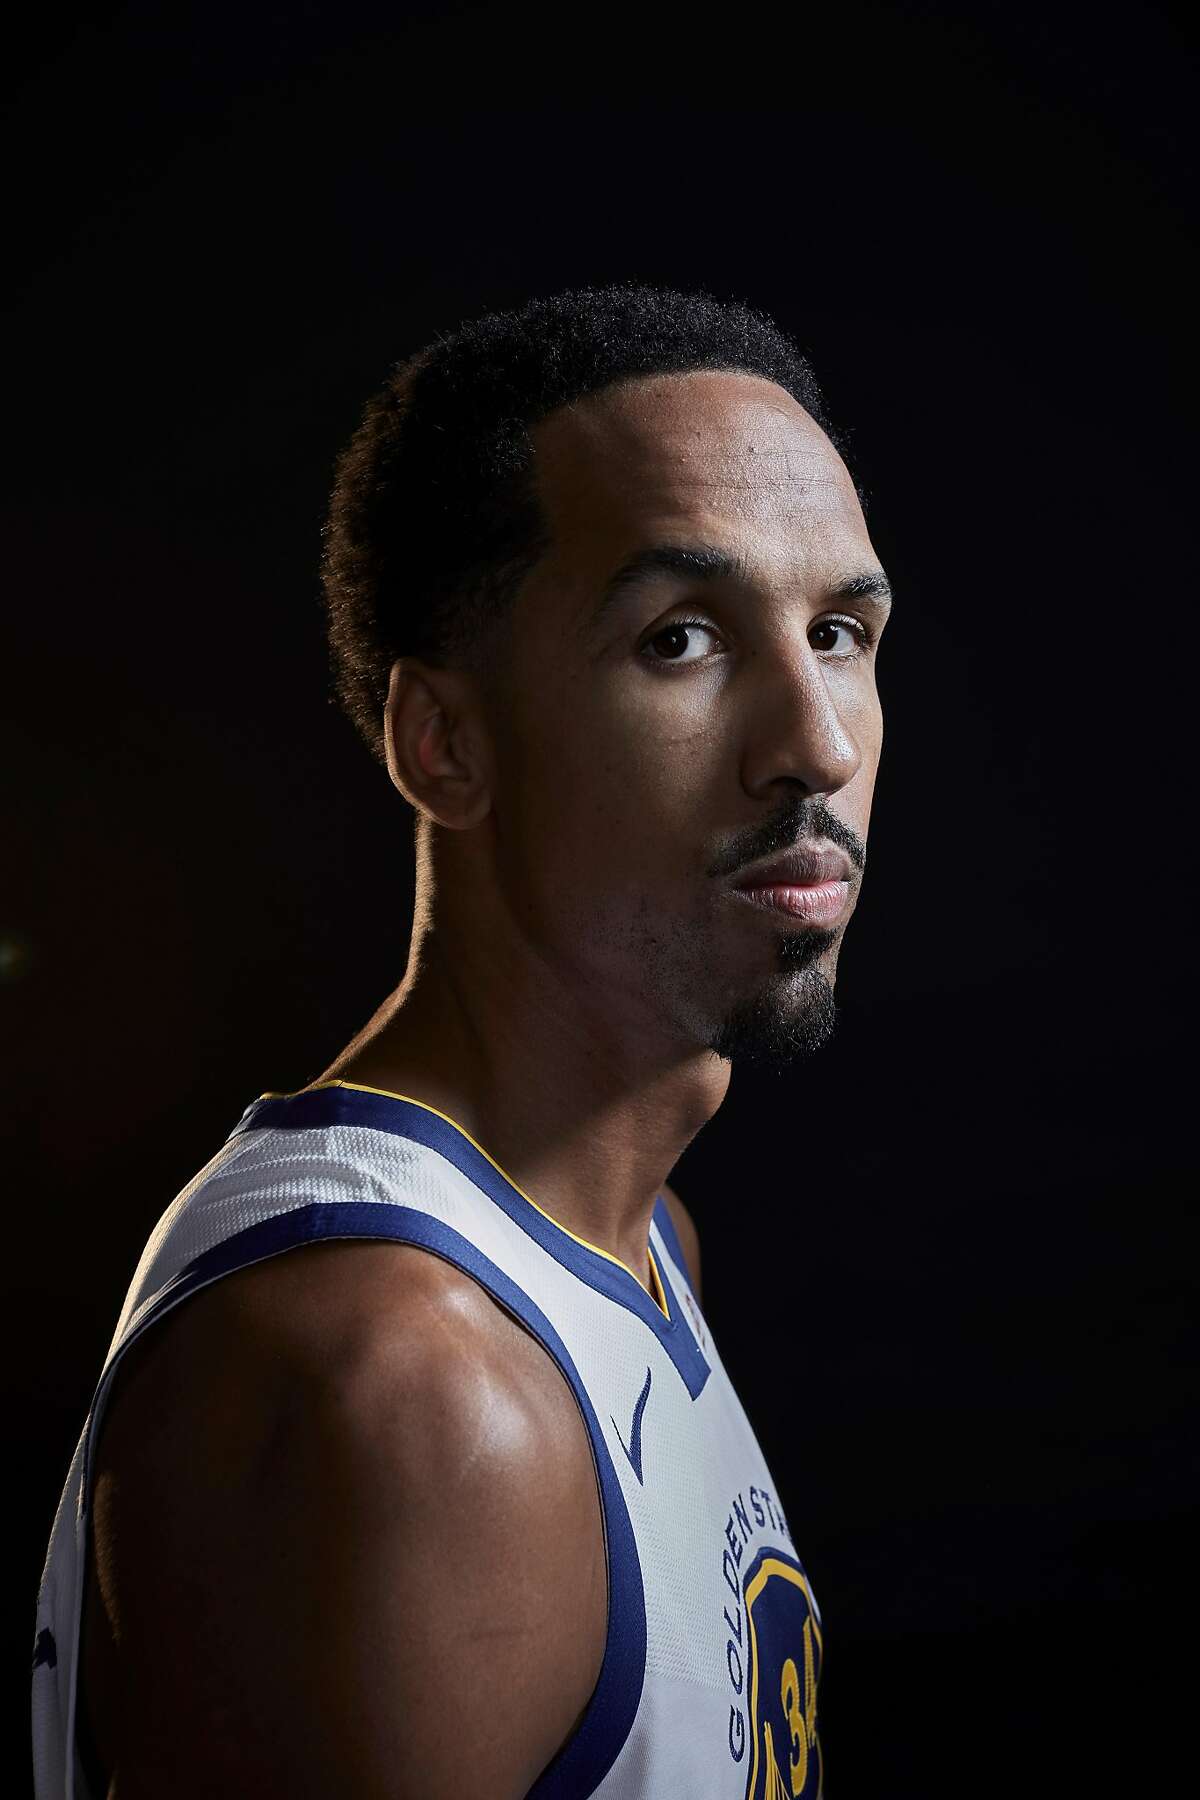 Shaun Livingston never watched replay of his gruesome knee injury